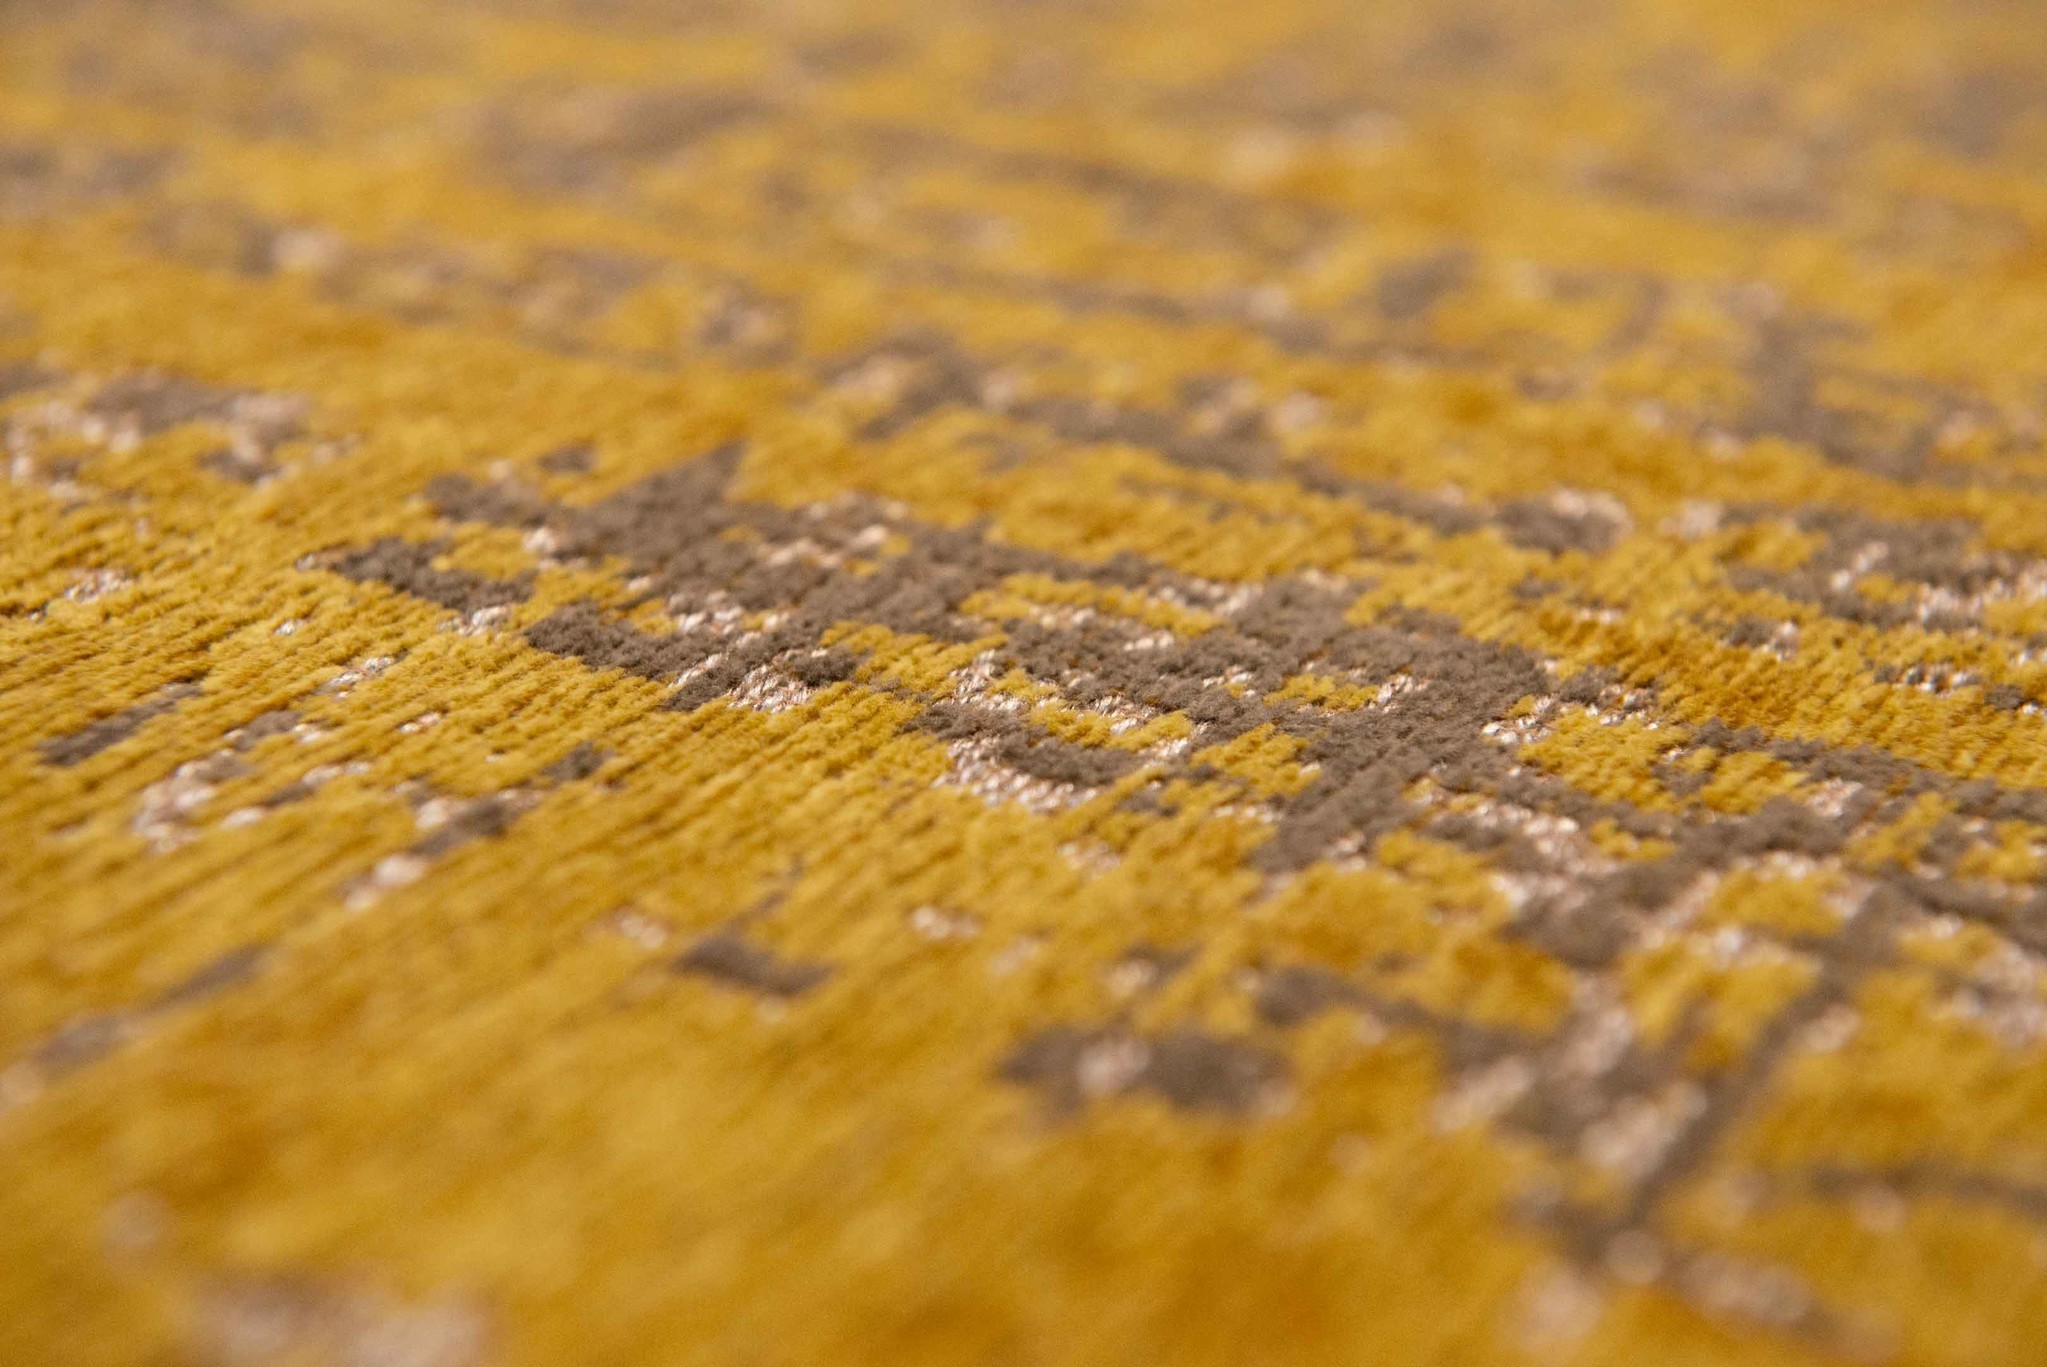 Abstract Gold Belgian Rug